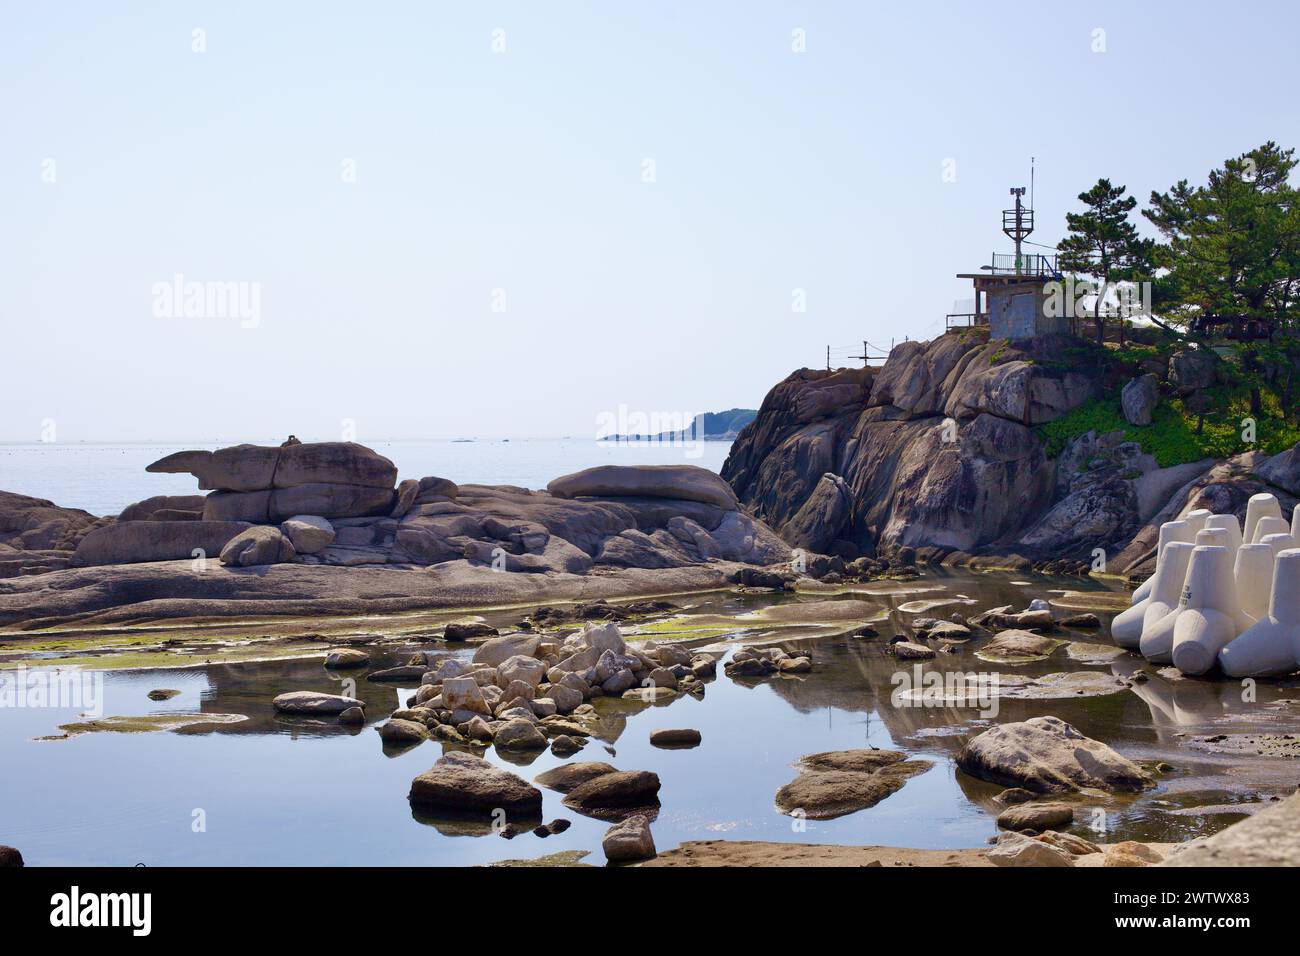 Goseong County, South Korea - July 30, 2019: Coastal rocks at Cheonjin Beach trap placid waters from the East Sea, with a retired military lookout pos Stock Photo